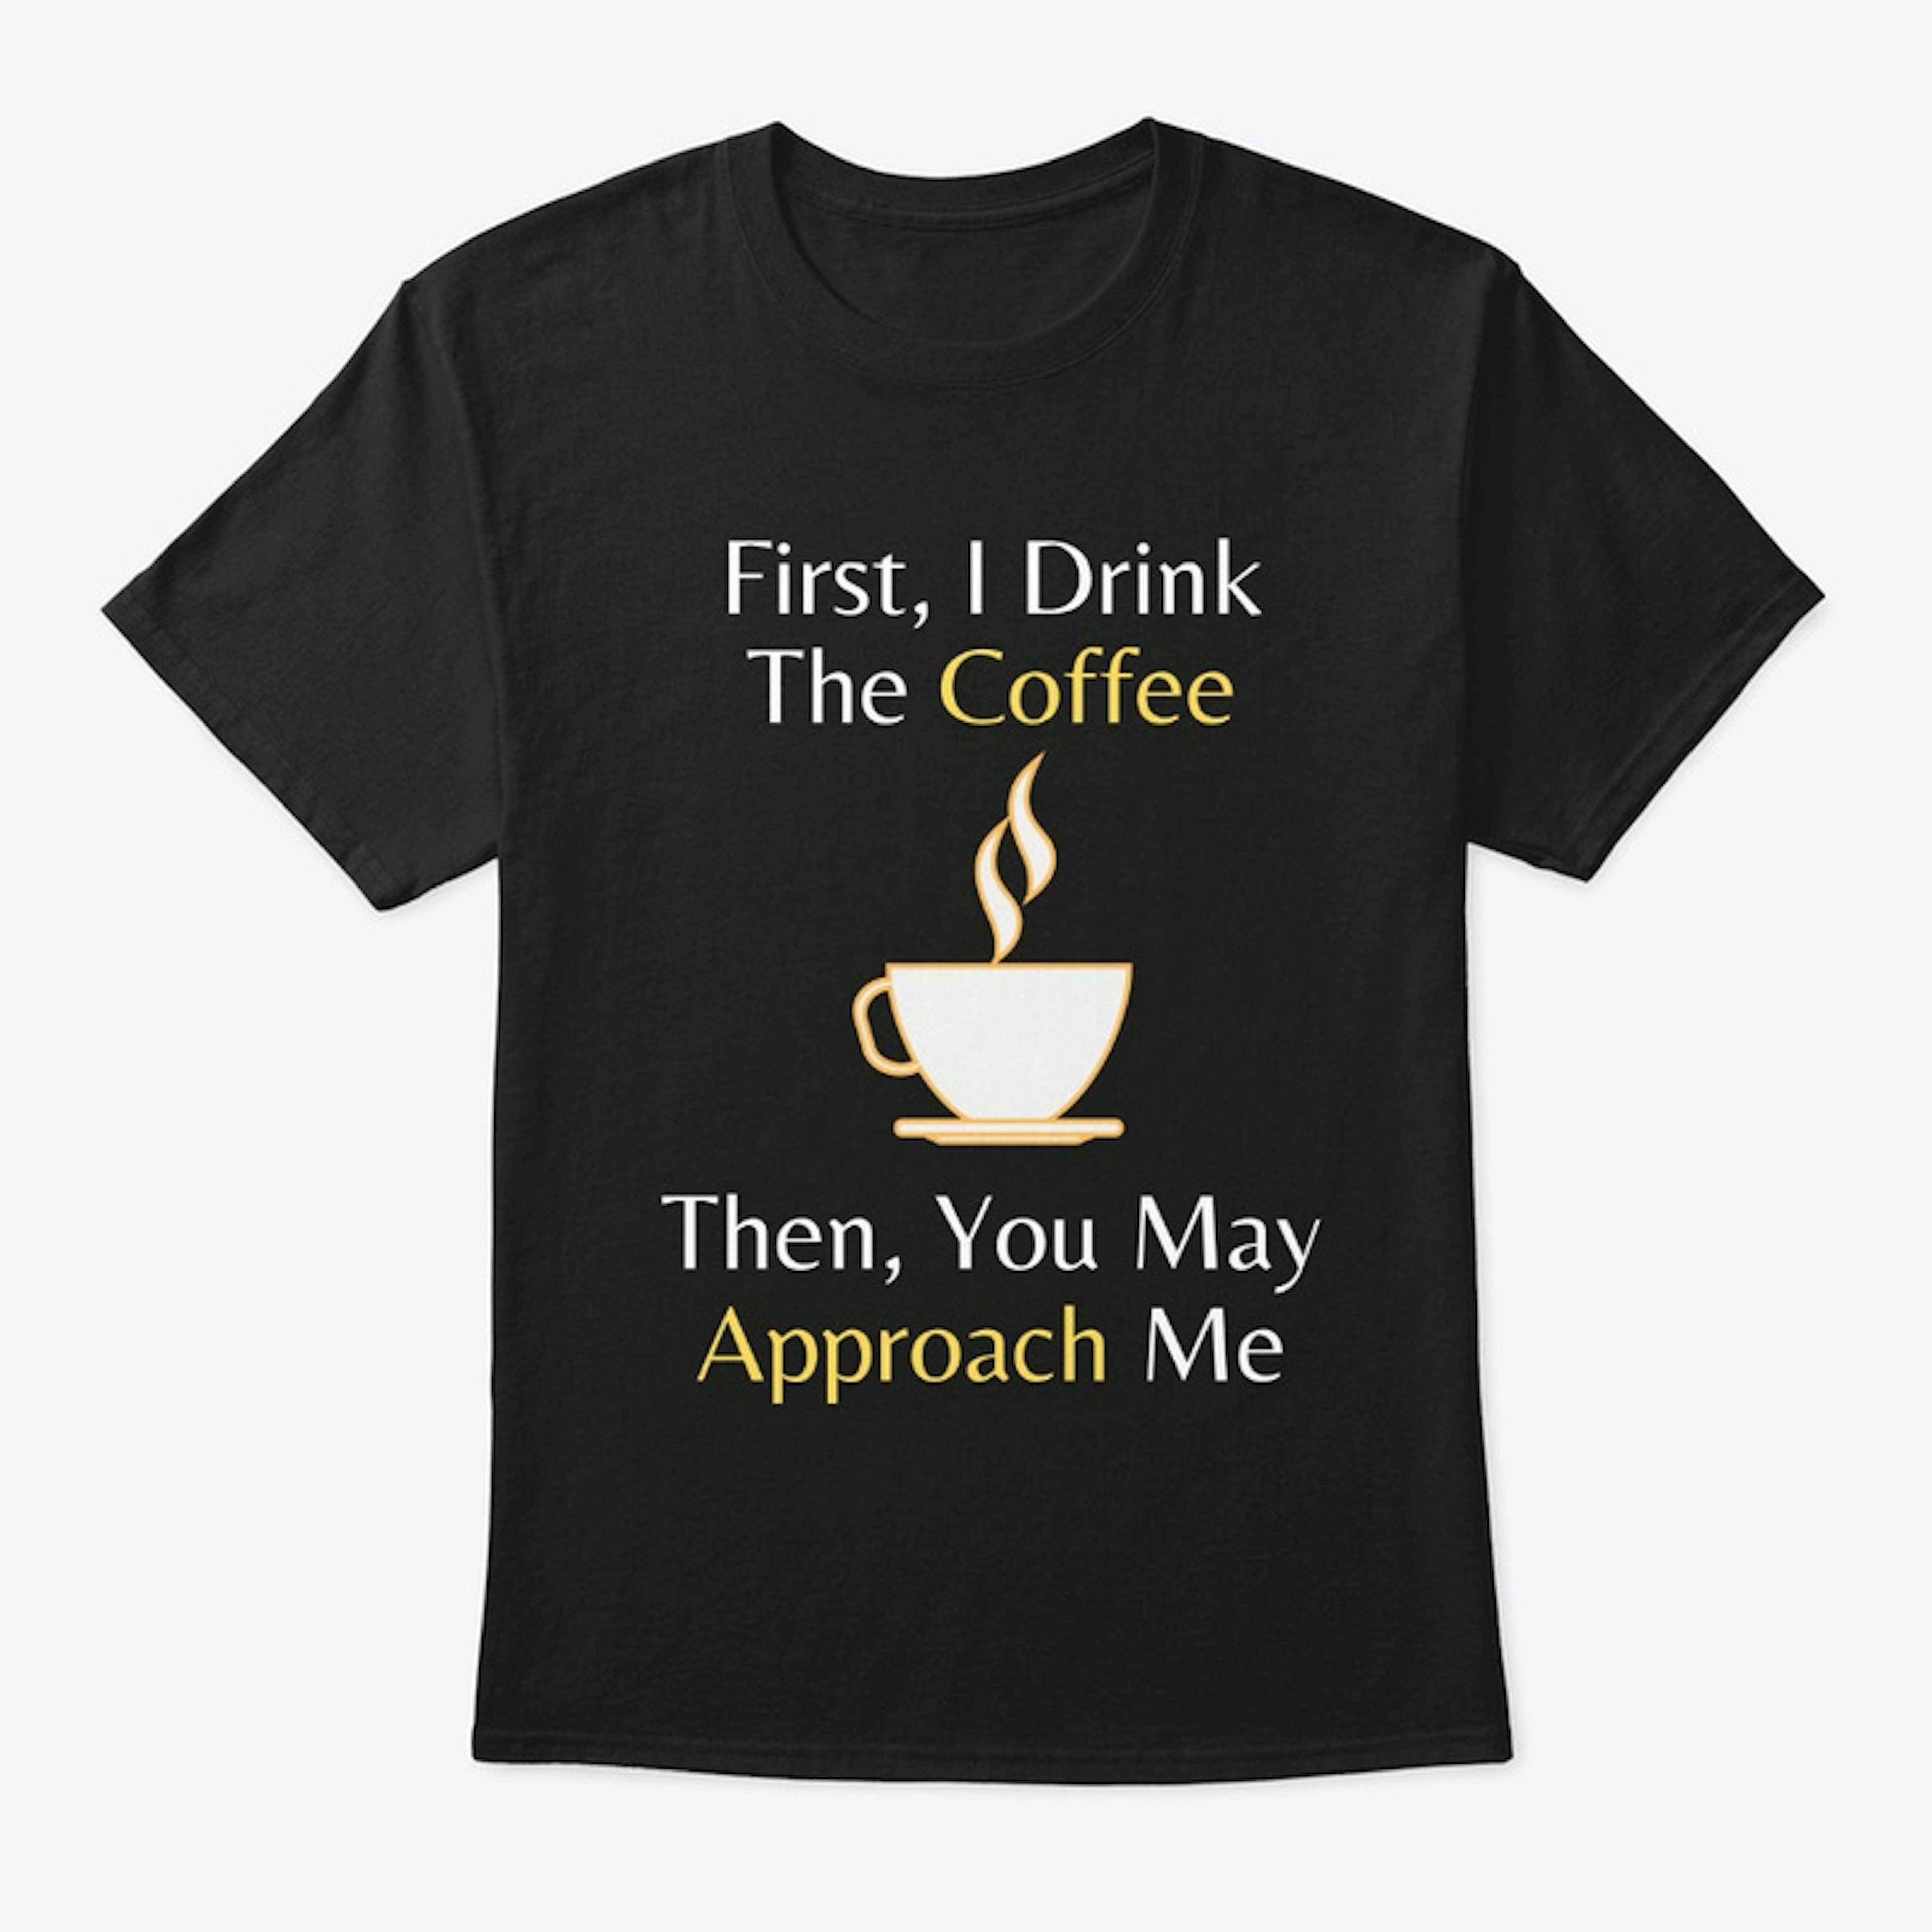 First, I Drink The Coffee